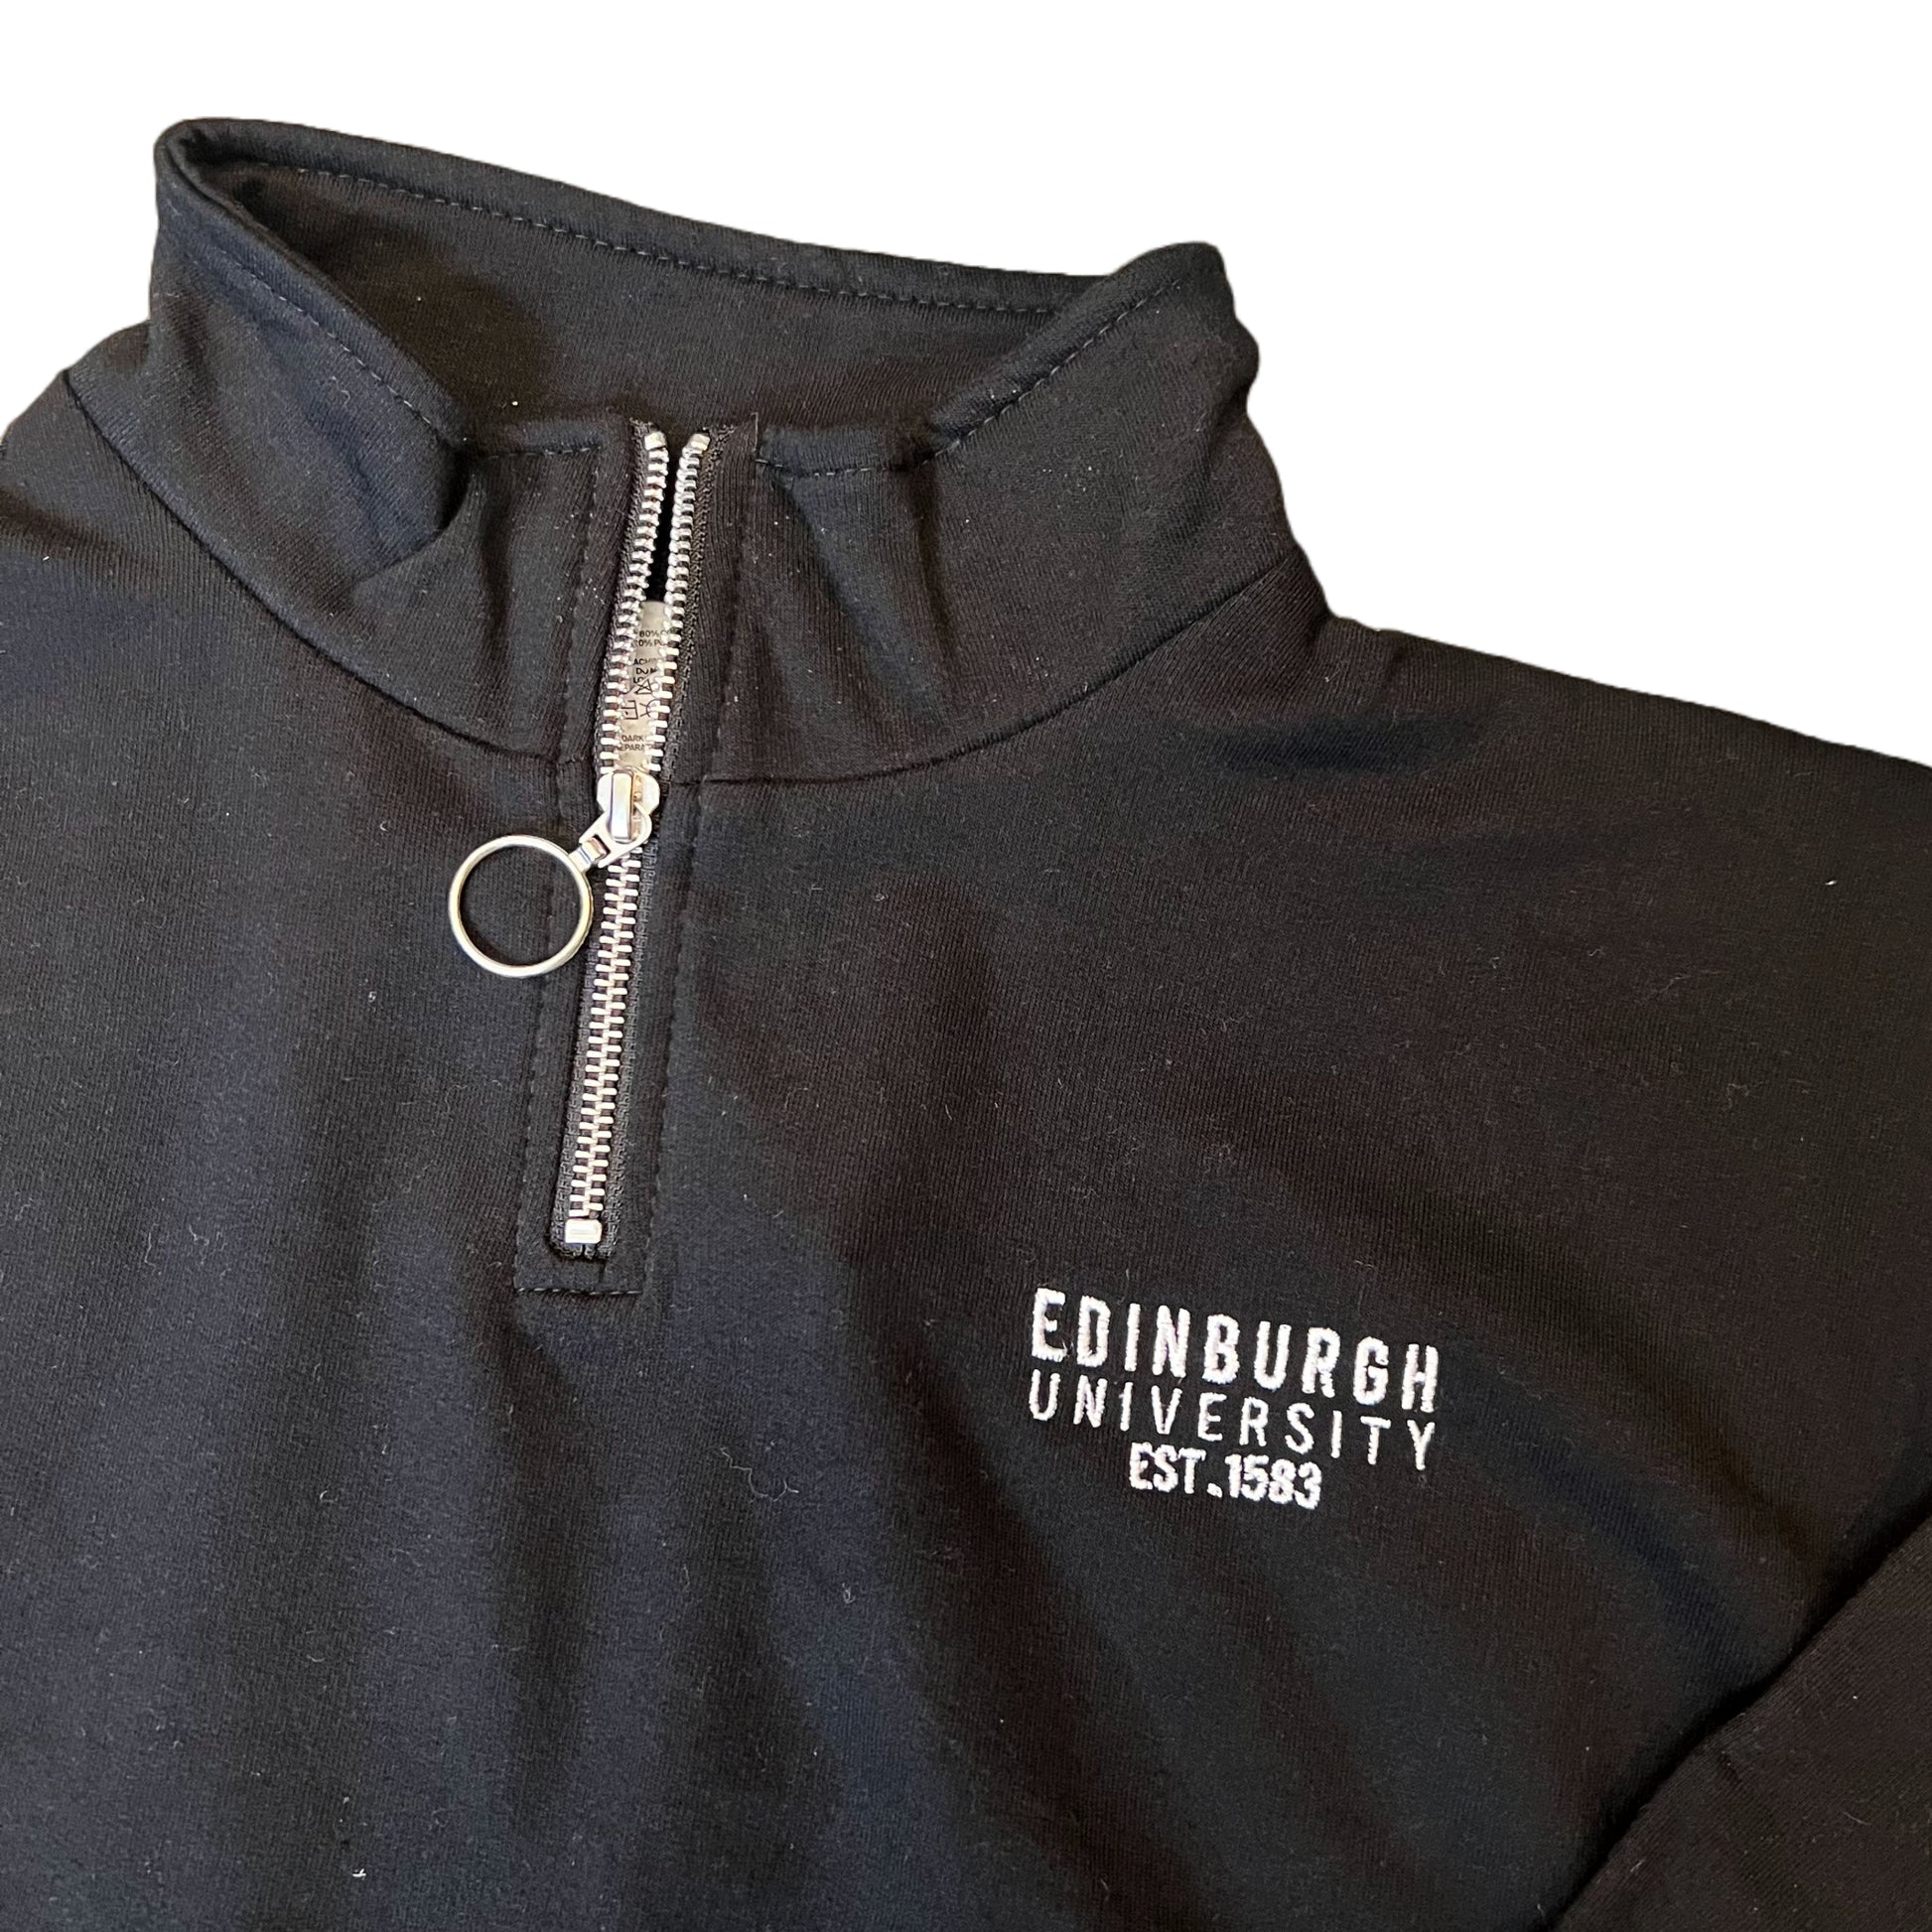 Close up of the Black quarter zip cropped sweatshirt with 'Edinburgh University Est. 1583' embroidered in white.